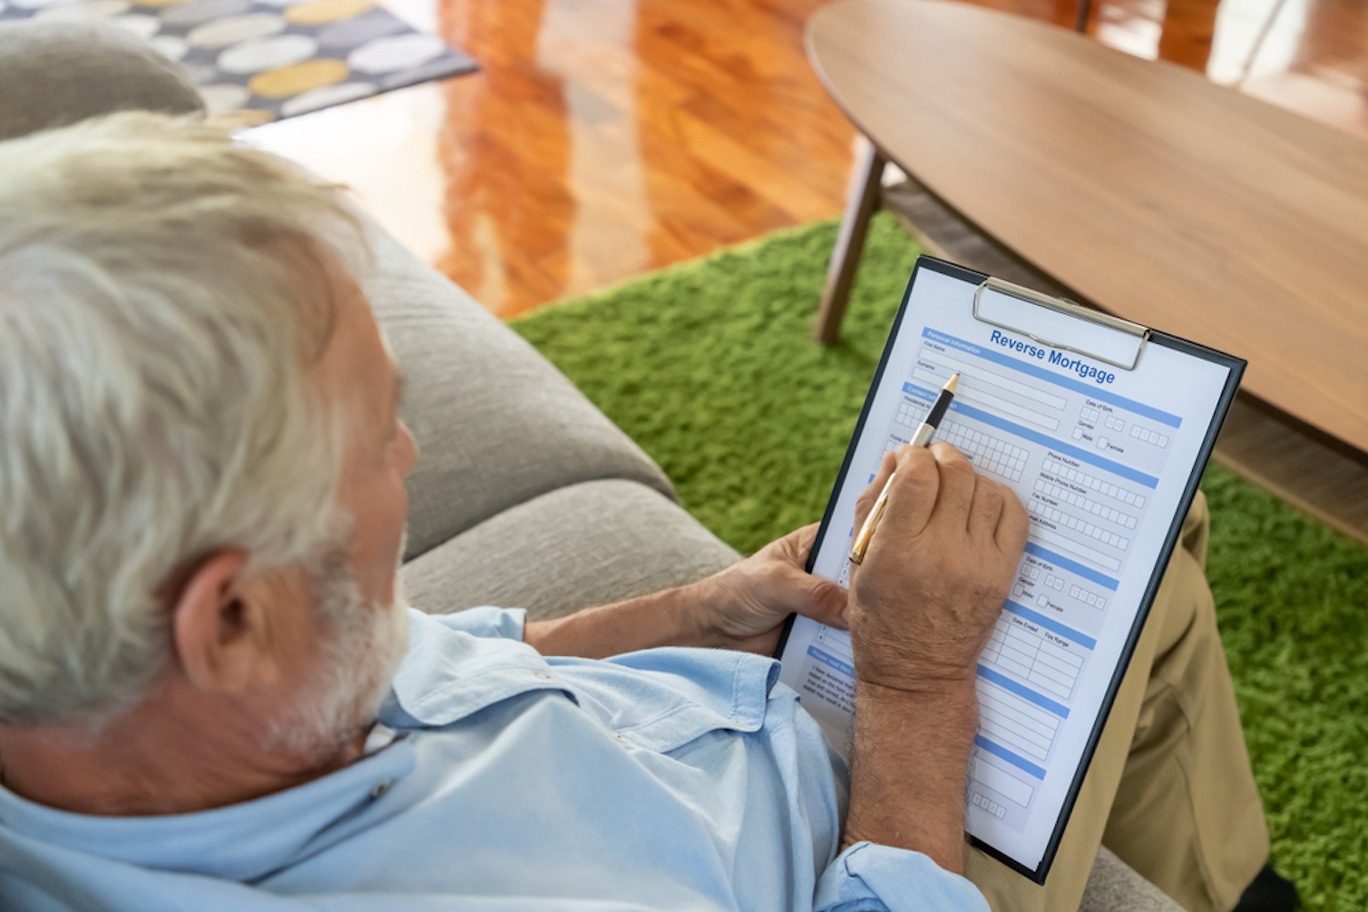 An older man with white hair and a light blue collared shirt sits on a couch and reviews a reverse mortgage application with pen in hand. 